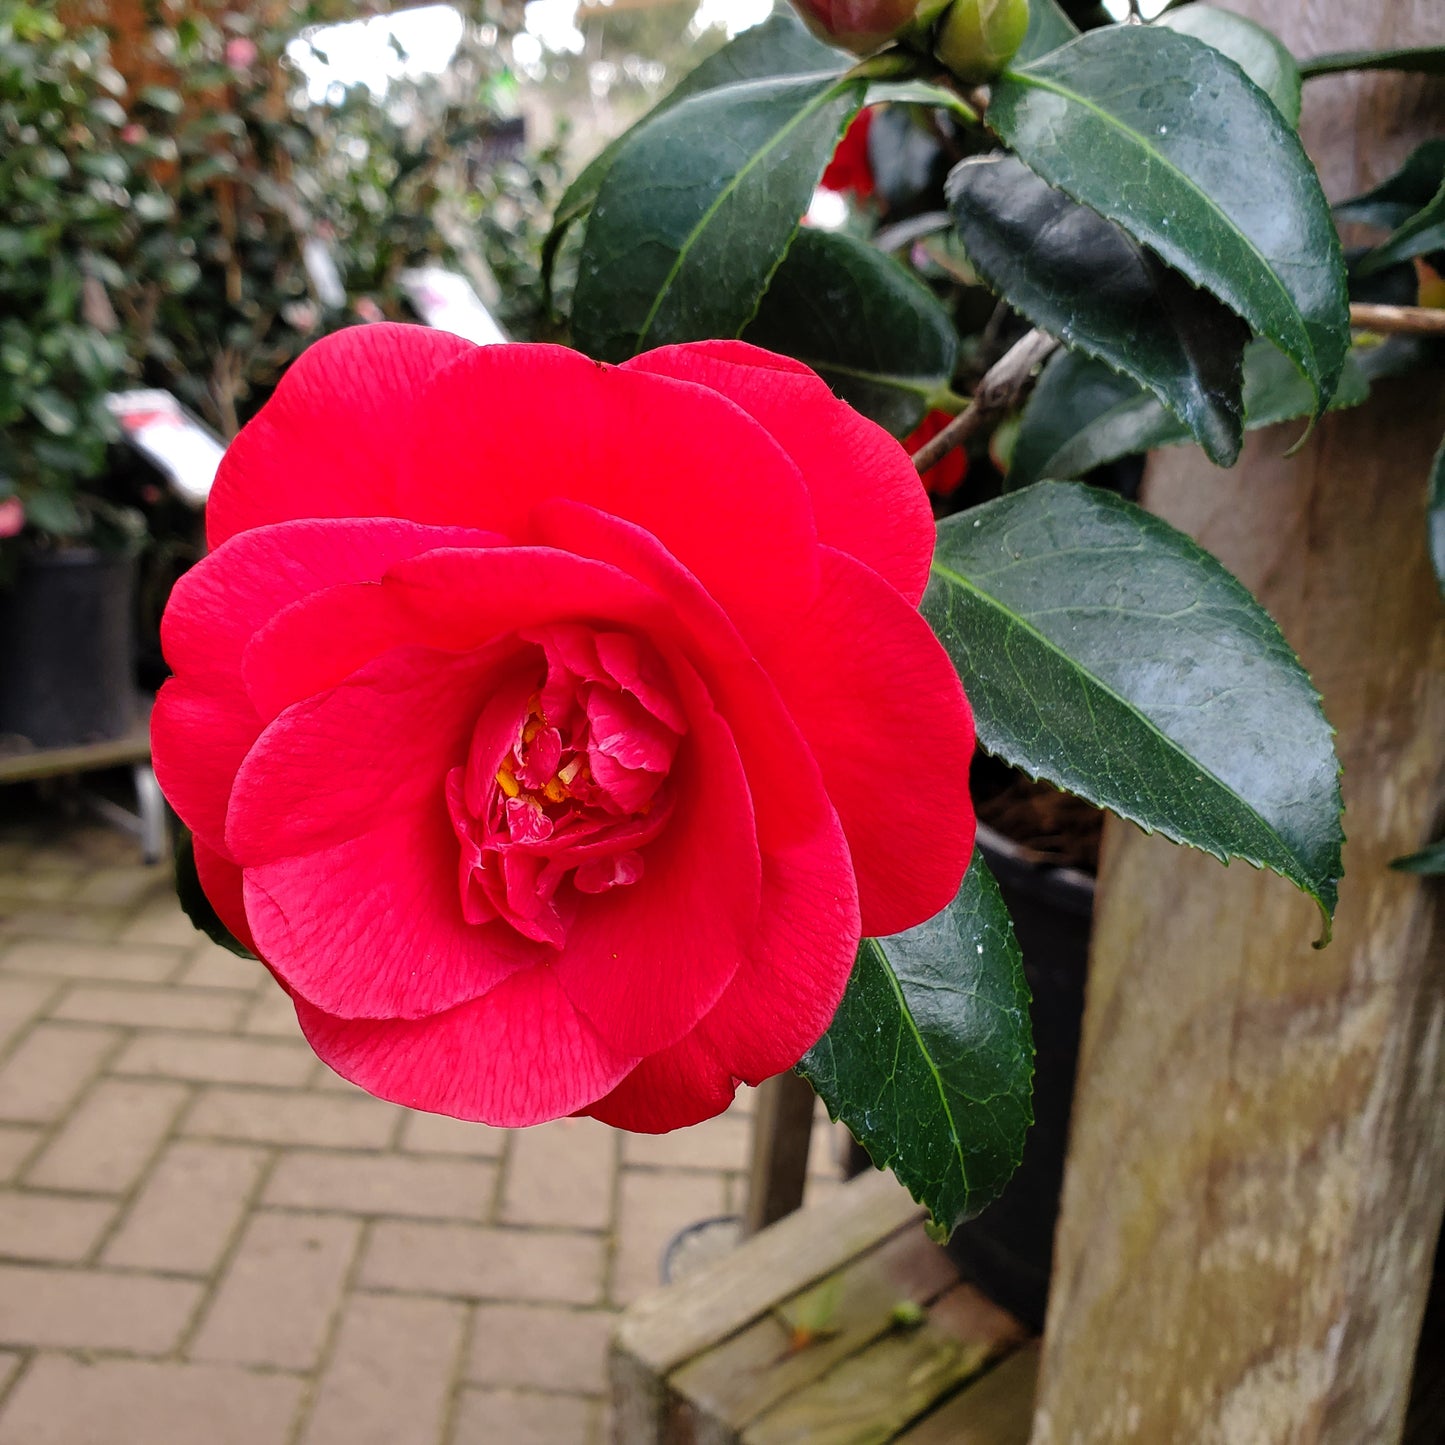 Camellia japonica 'Rosehill Red'